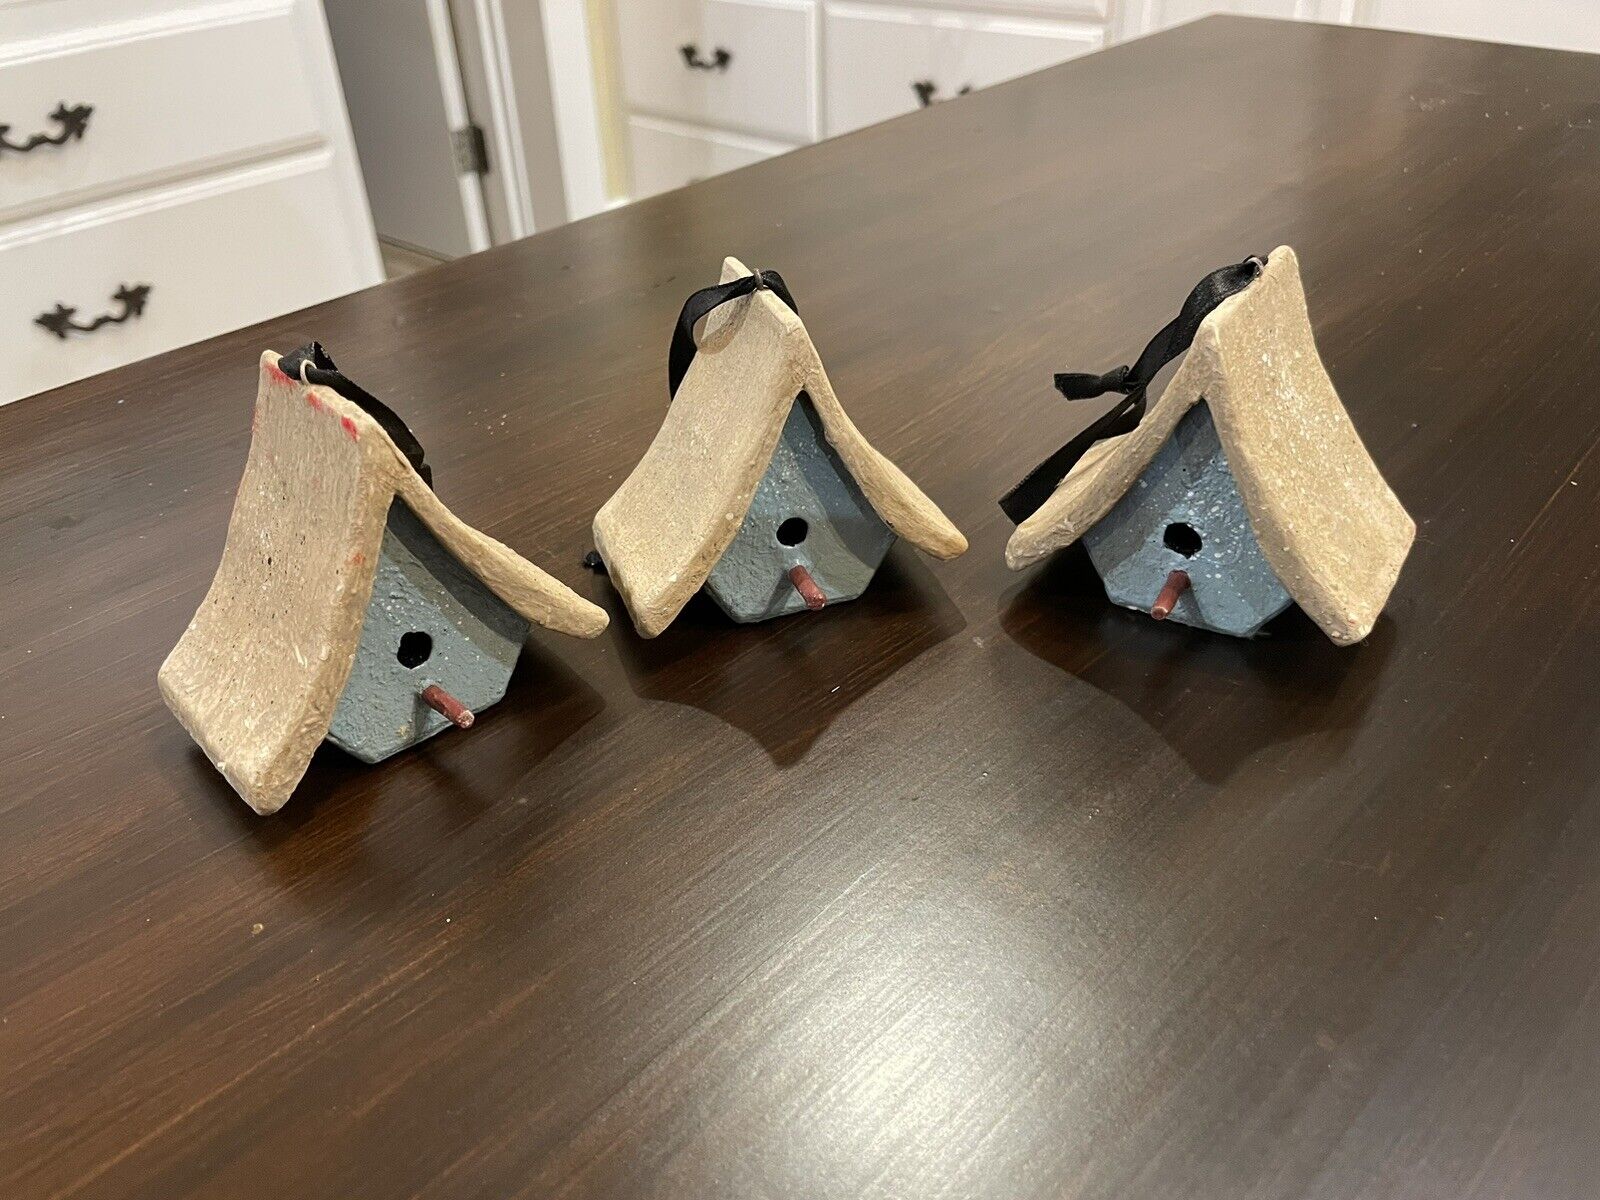 Vintage HOUSE OF HATTEN Hand Crafted Painted Christmas Ornaments - 3 Birdhouses